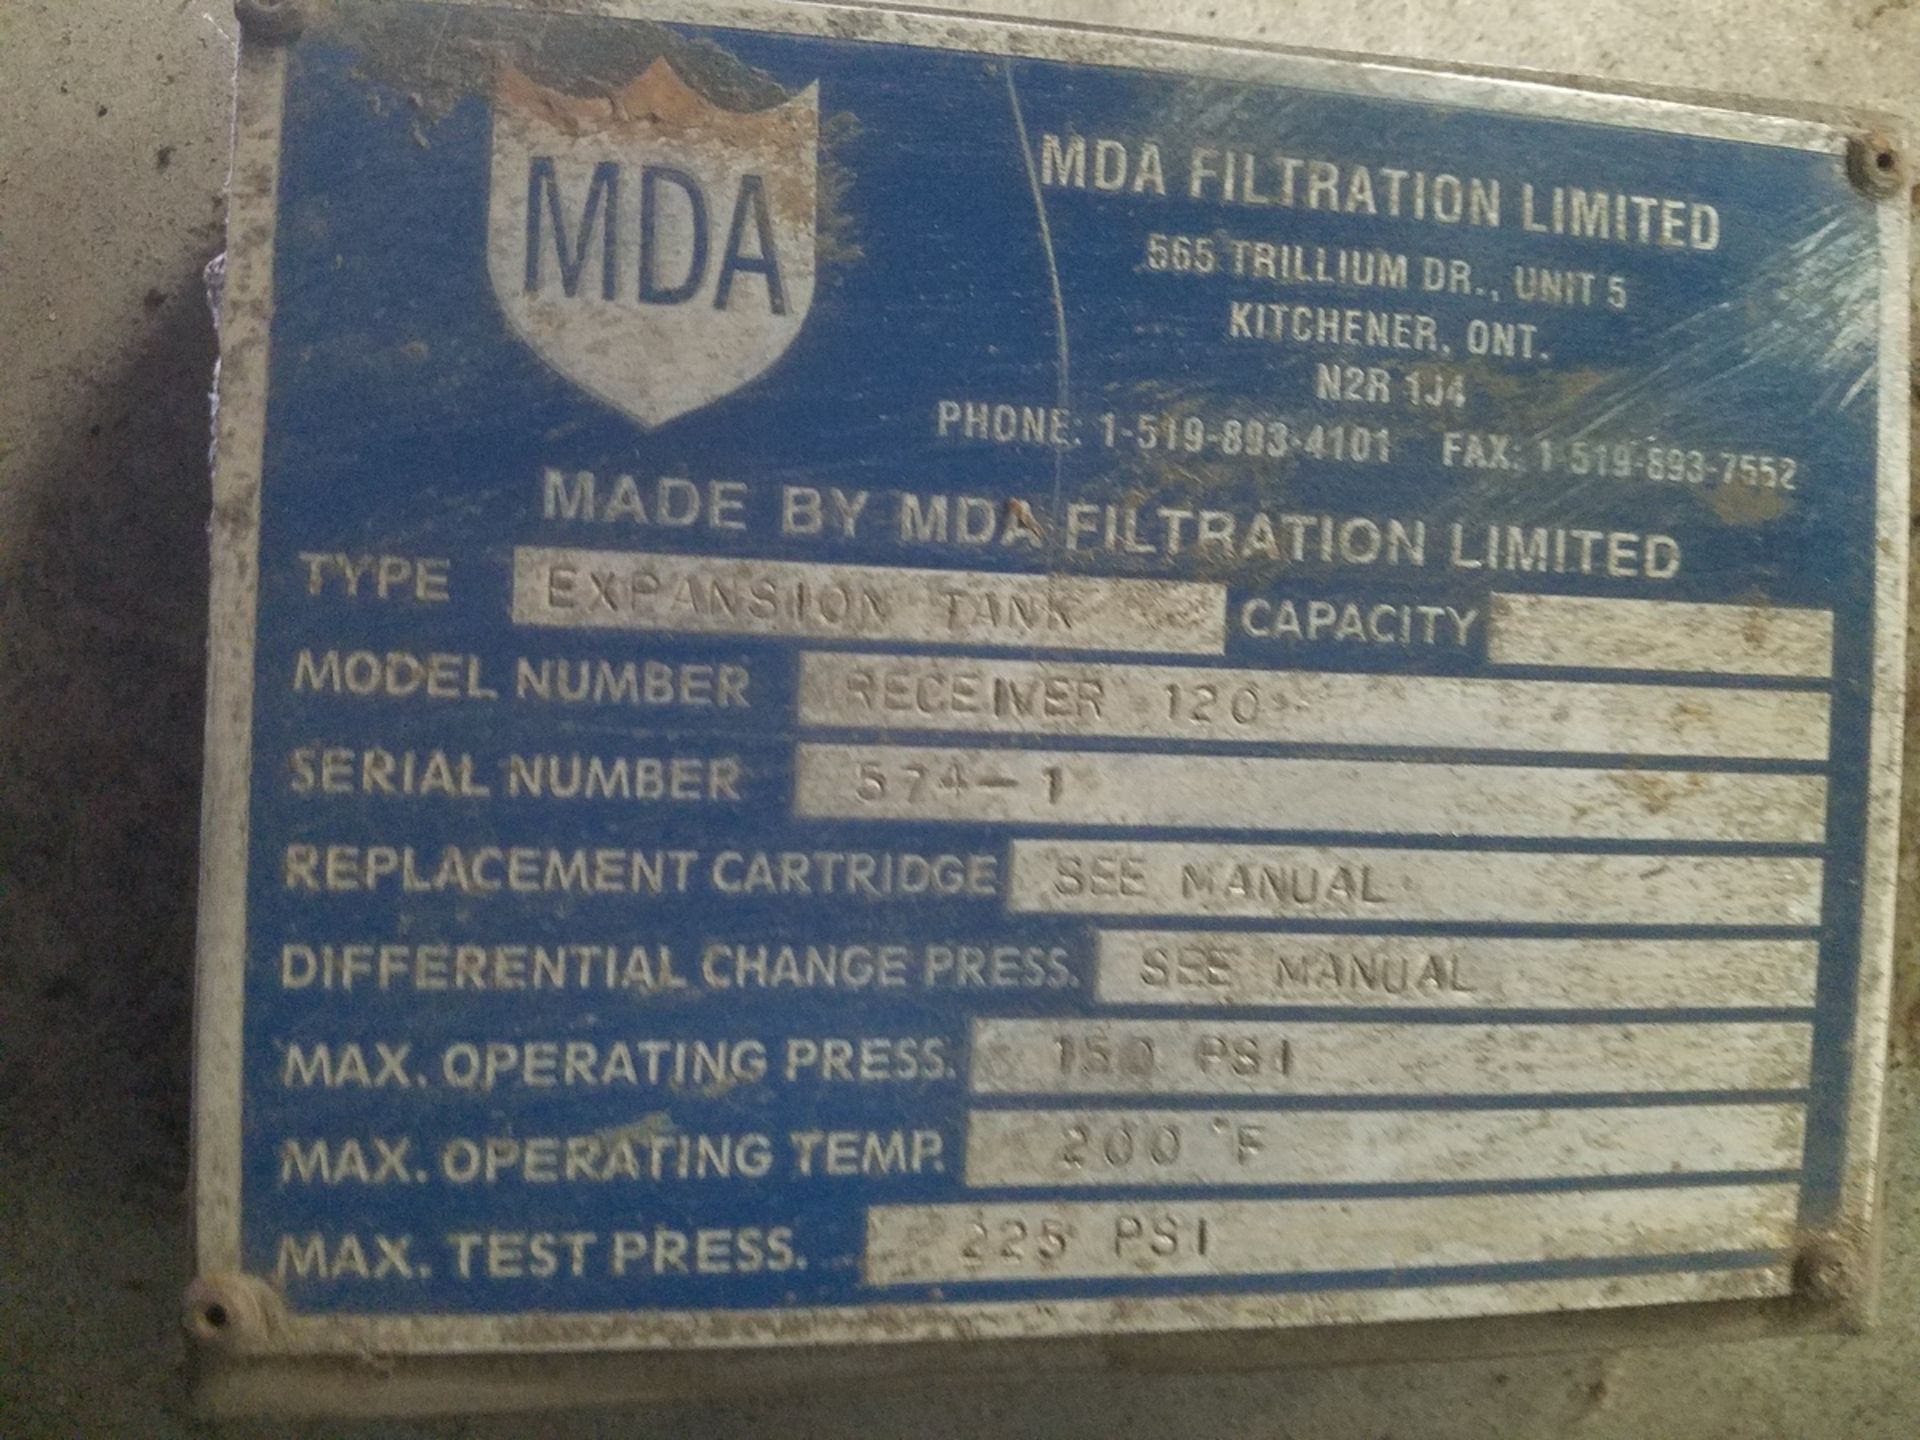 MDA Filtration 120 Gallon Expansion Tank, S/N 574-1 | Rig Fee: $100 - Image 2 of 2